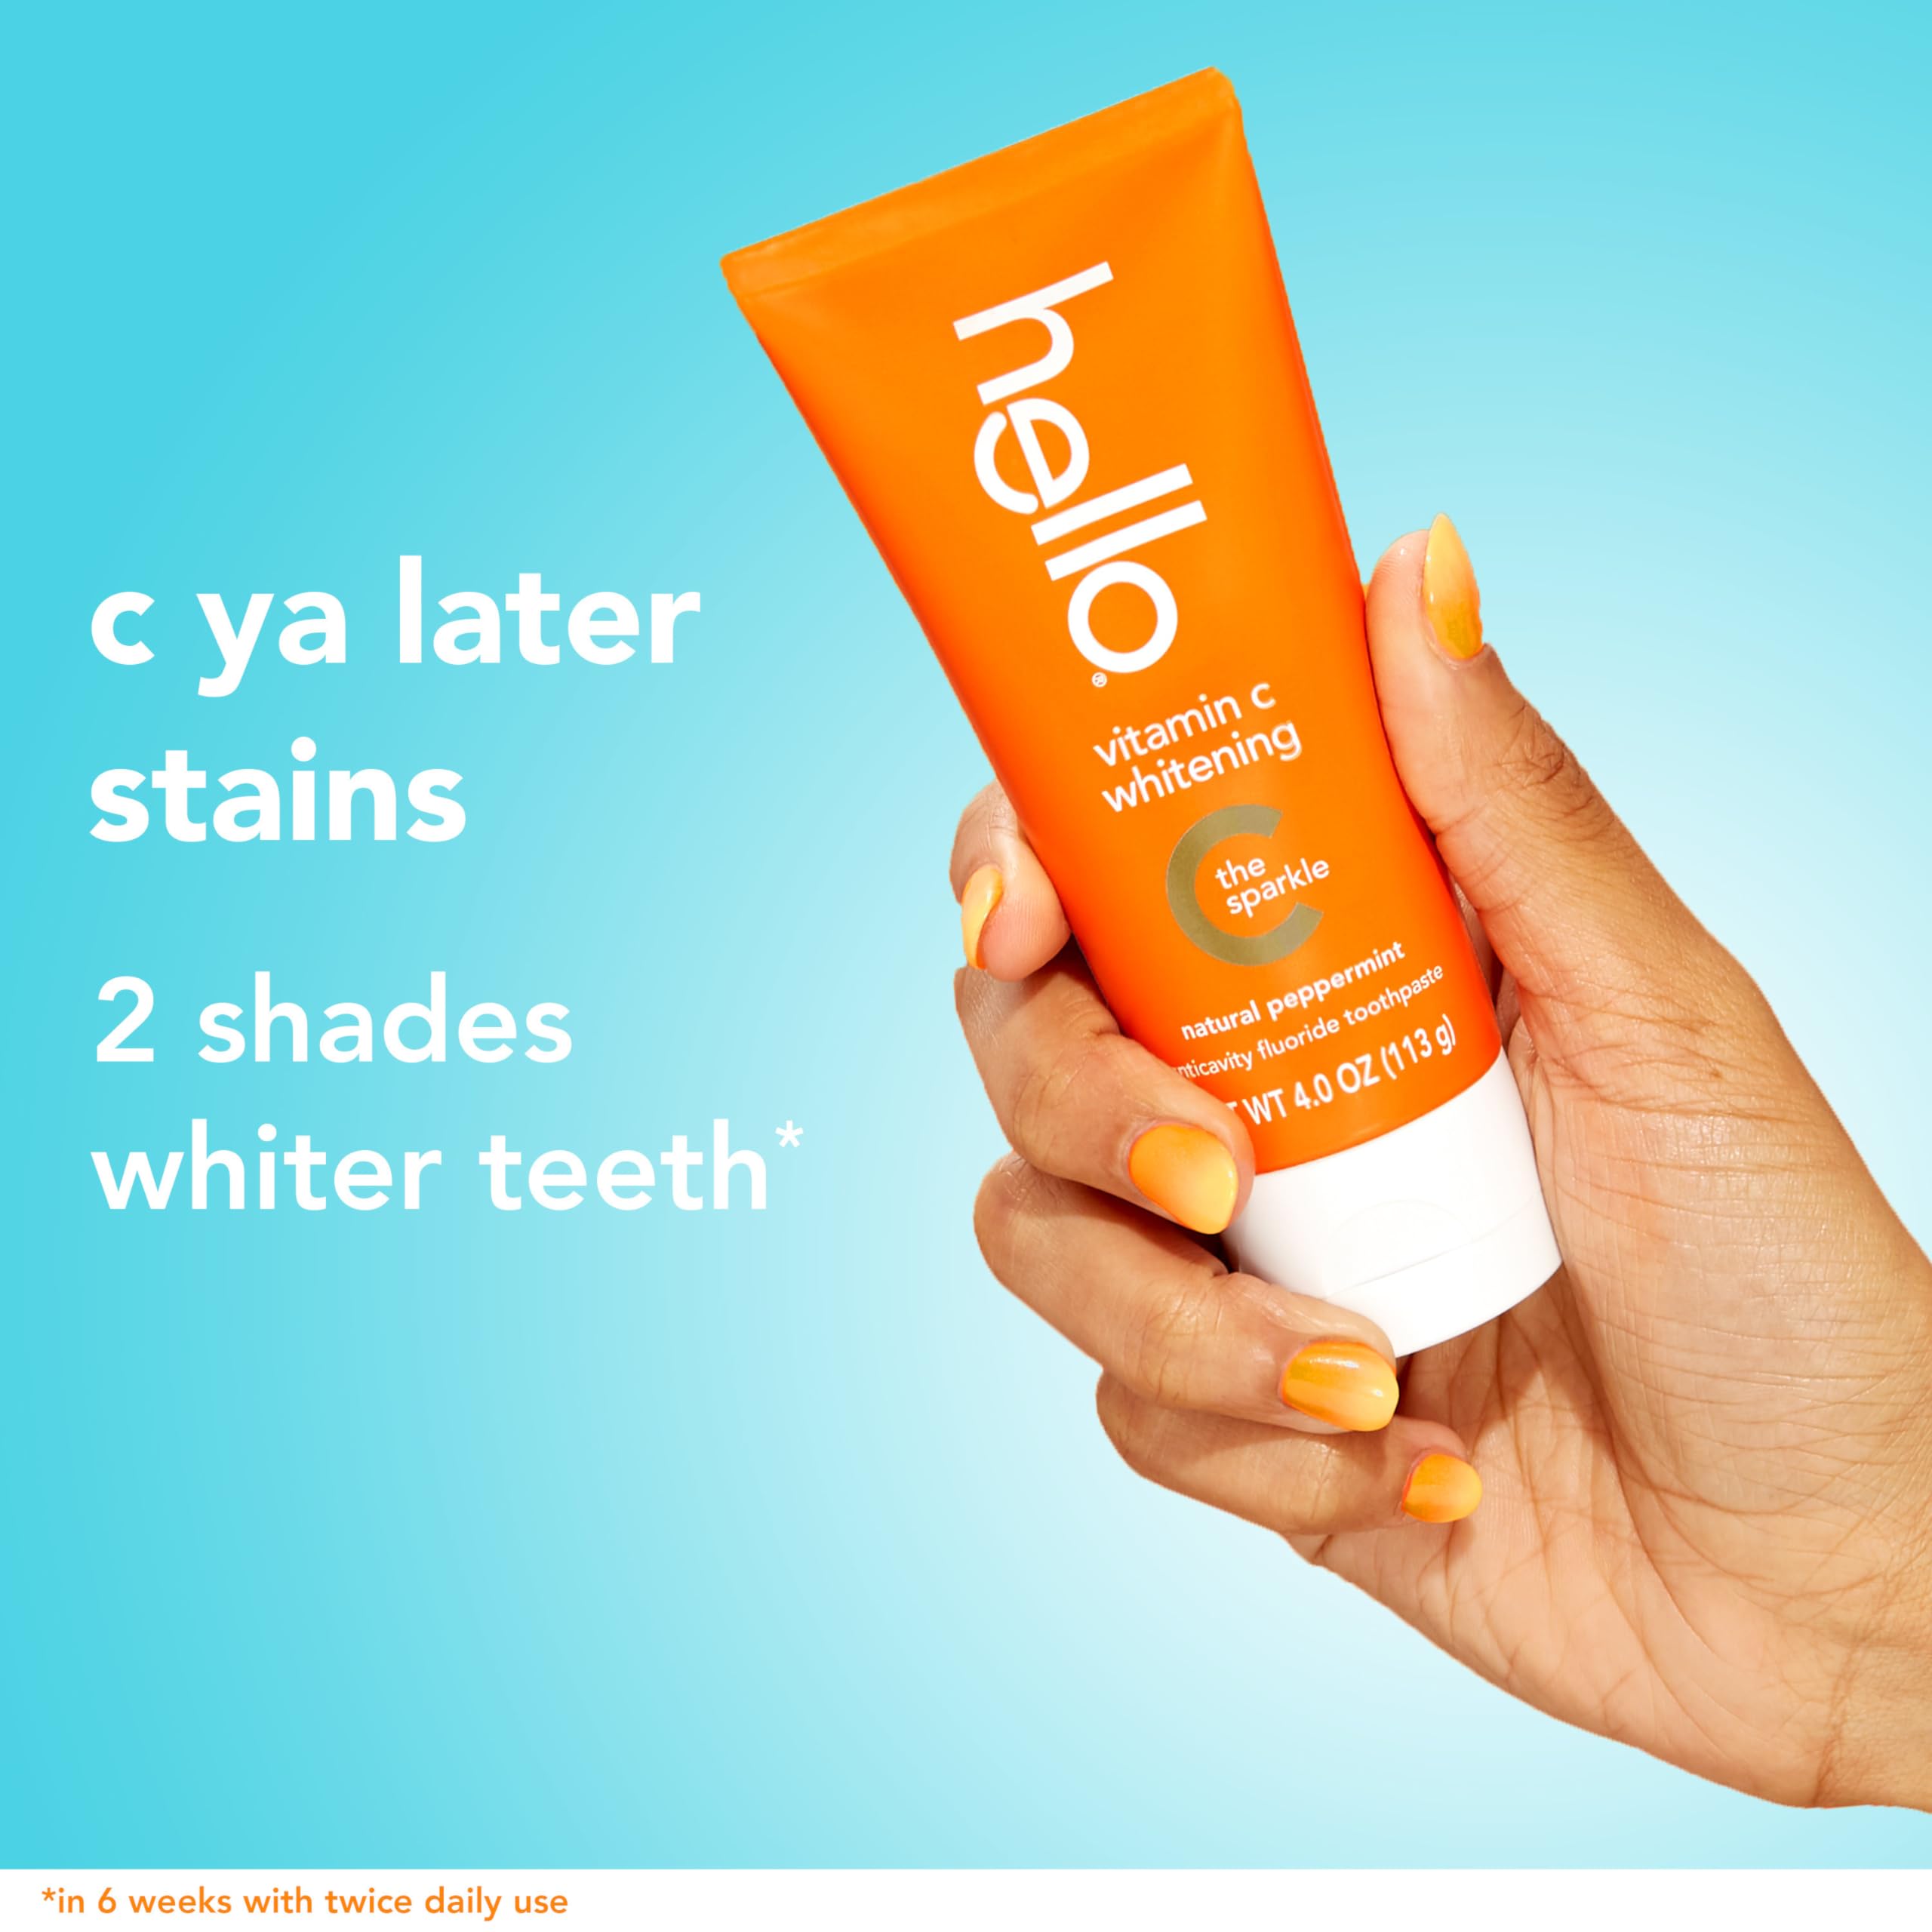 Hello Vitamin C Whitening Toothpaste with Fluoride, Teeth Whitening Toothpaste for Adults, Helps Freshen Breath and Removes Surface Stains, SLS Free, Natural Peppermint Flavor, 4.0 oz Tube